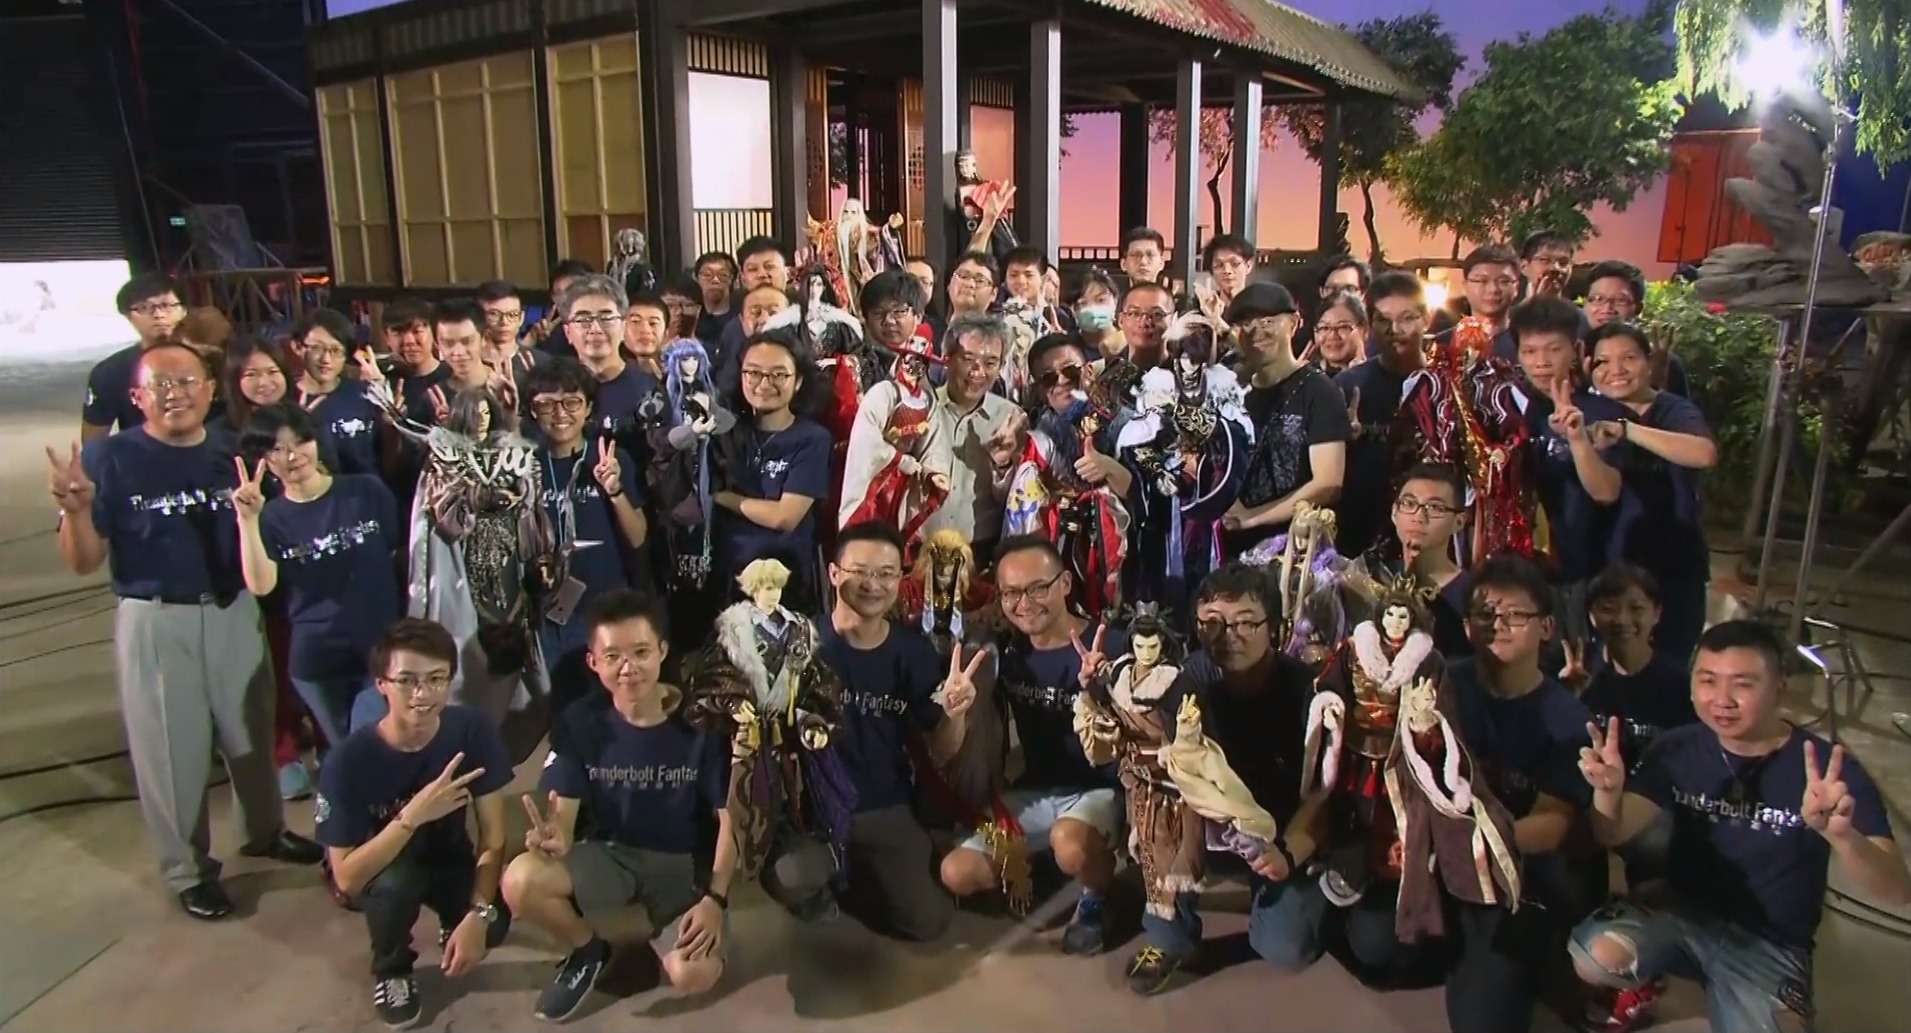 The cast and puppets of Thunderbolt Fantasy arranged bleacher style in a group photo at the wrap of show.